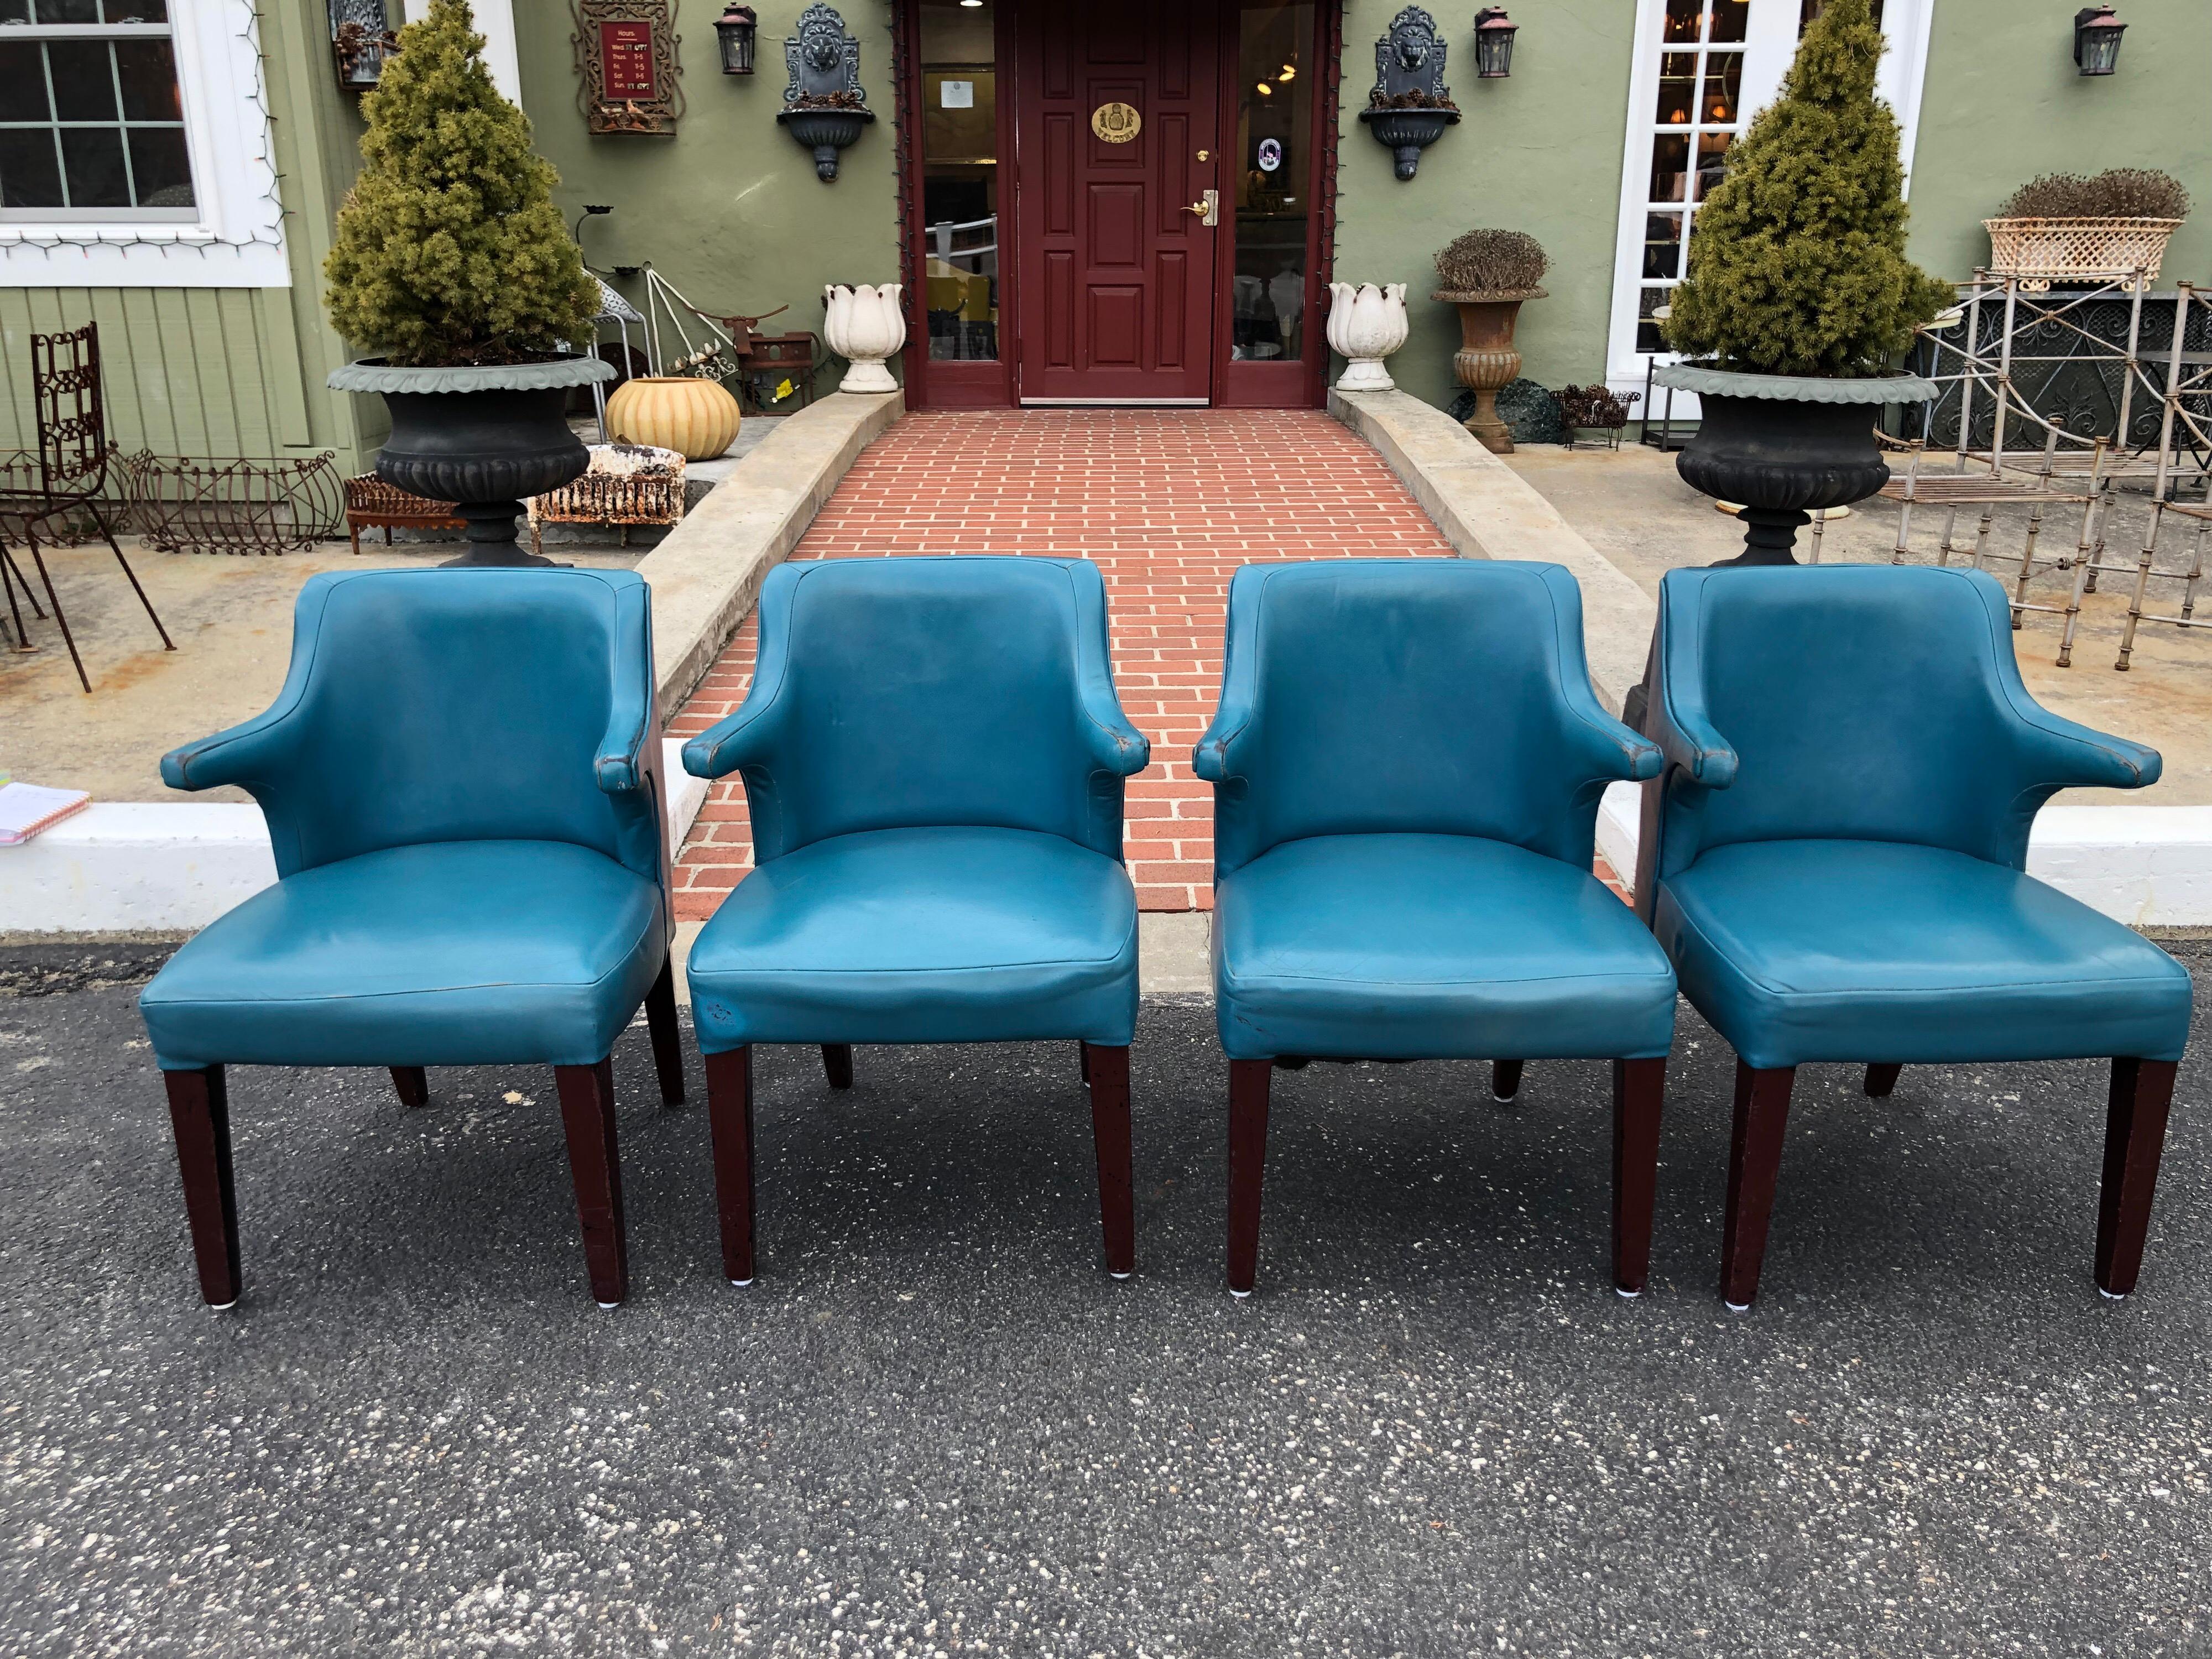 Mid-20th Century Set of Four Mid-Century Modern Chairs in Peacock Blue